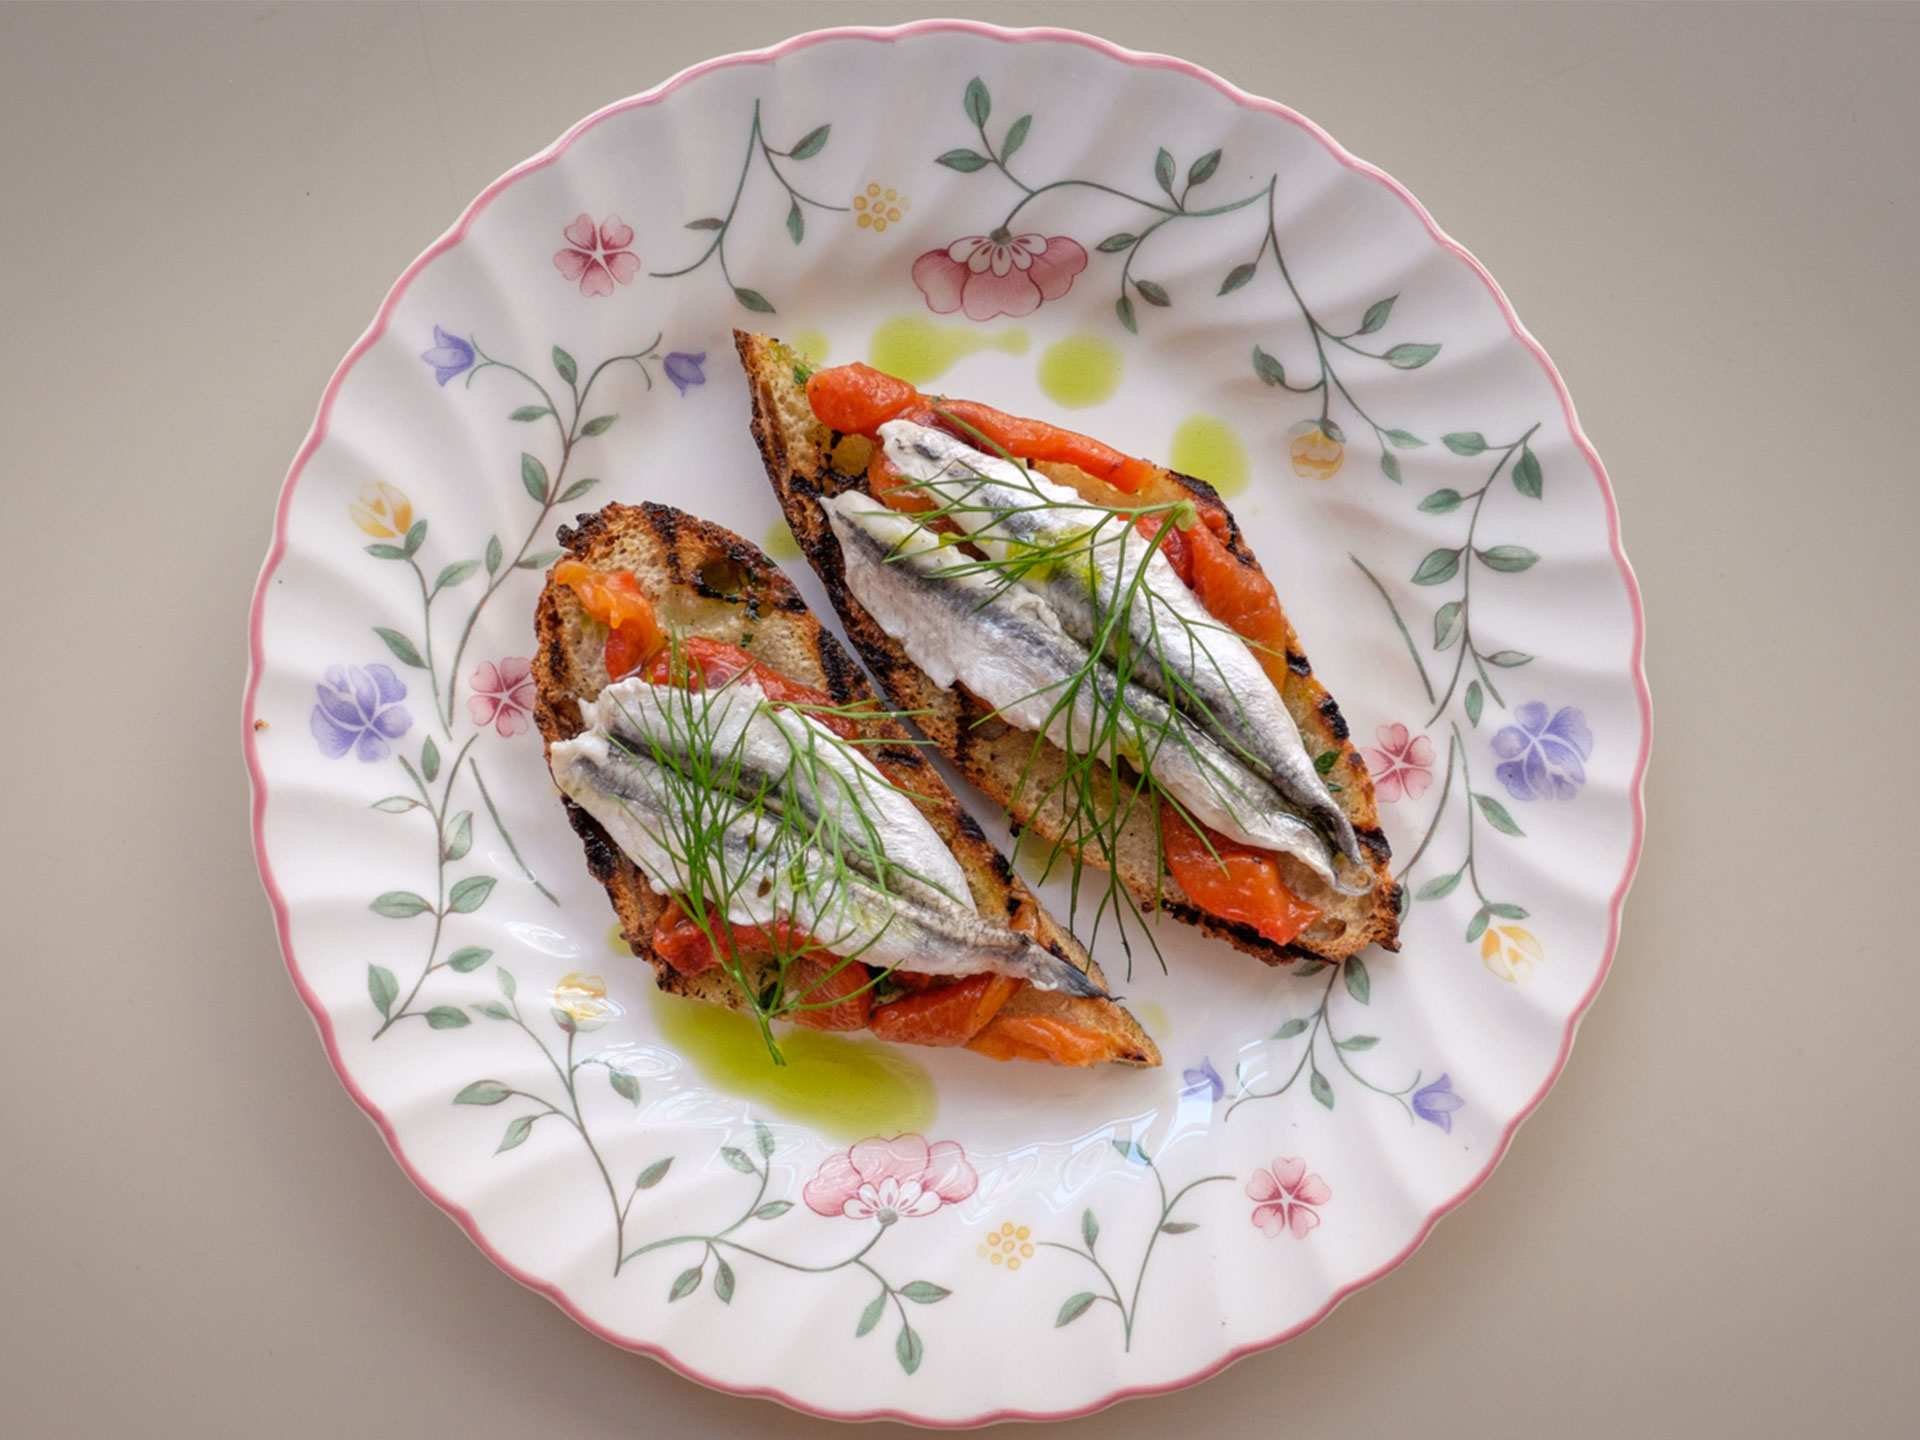 Michelin recommended and Michelin star restaurants in Toronto | Crostini at Ardo Restaurant